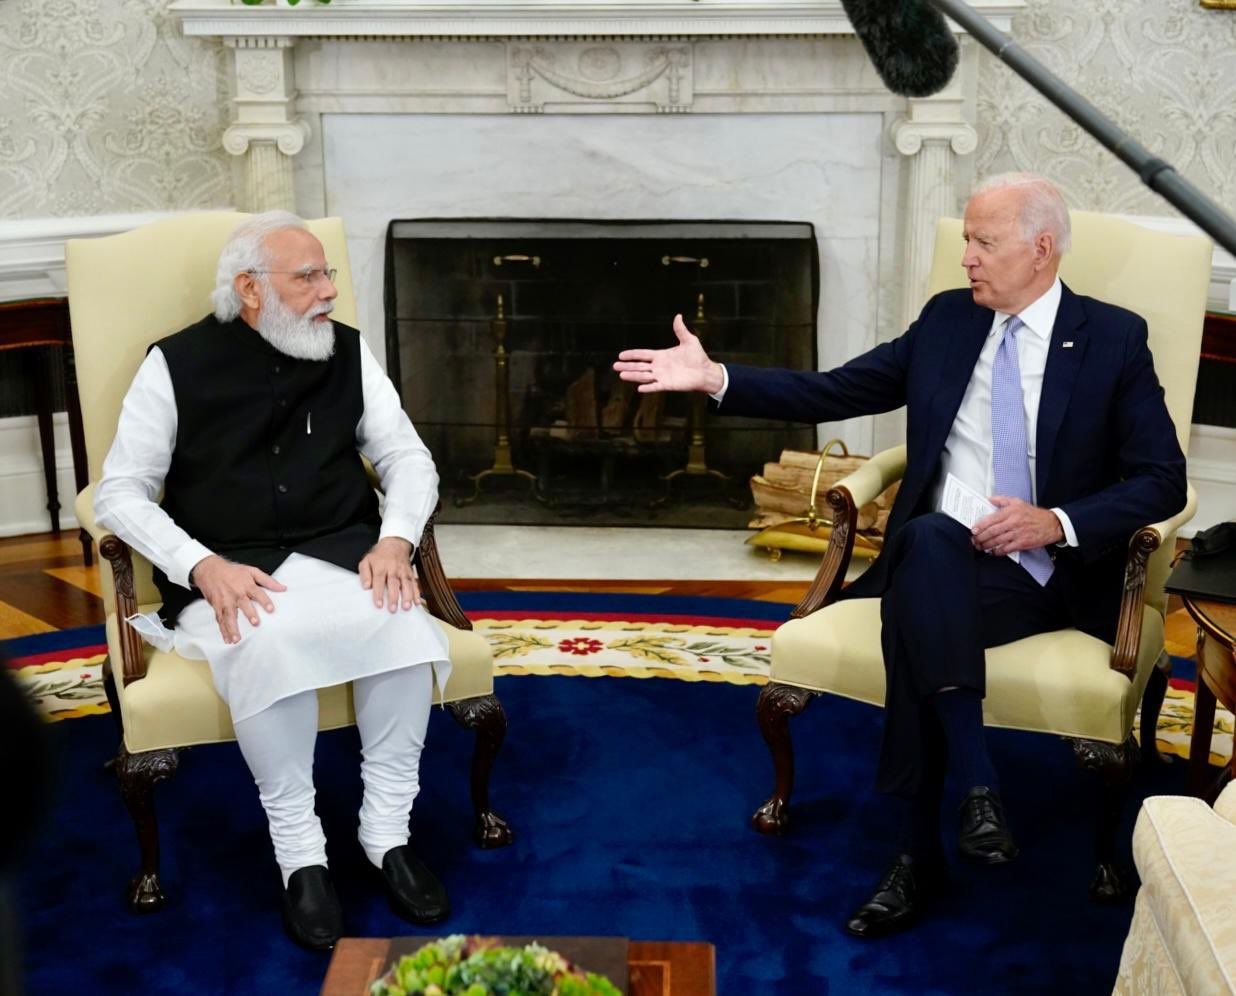 PM Modi to Biden: Trade continues to play major role between US, India